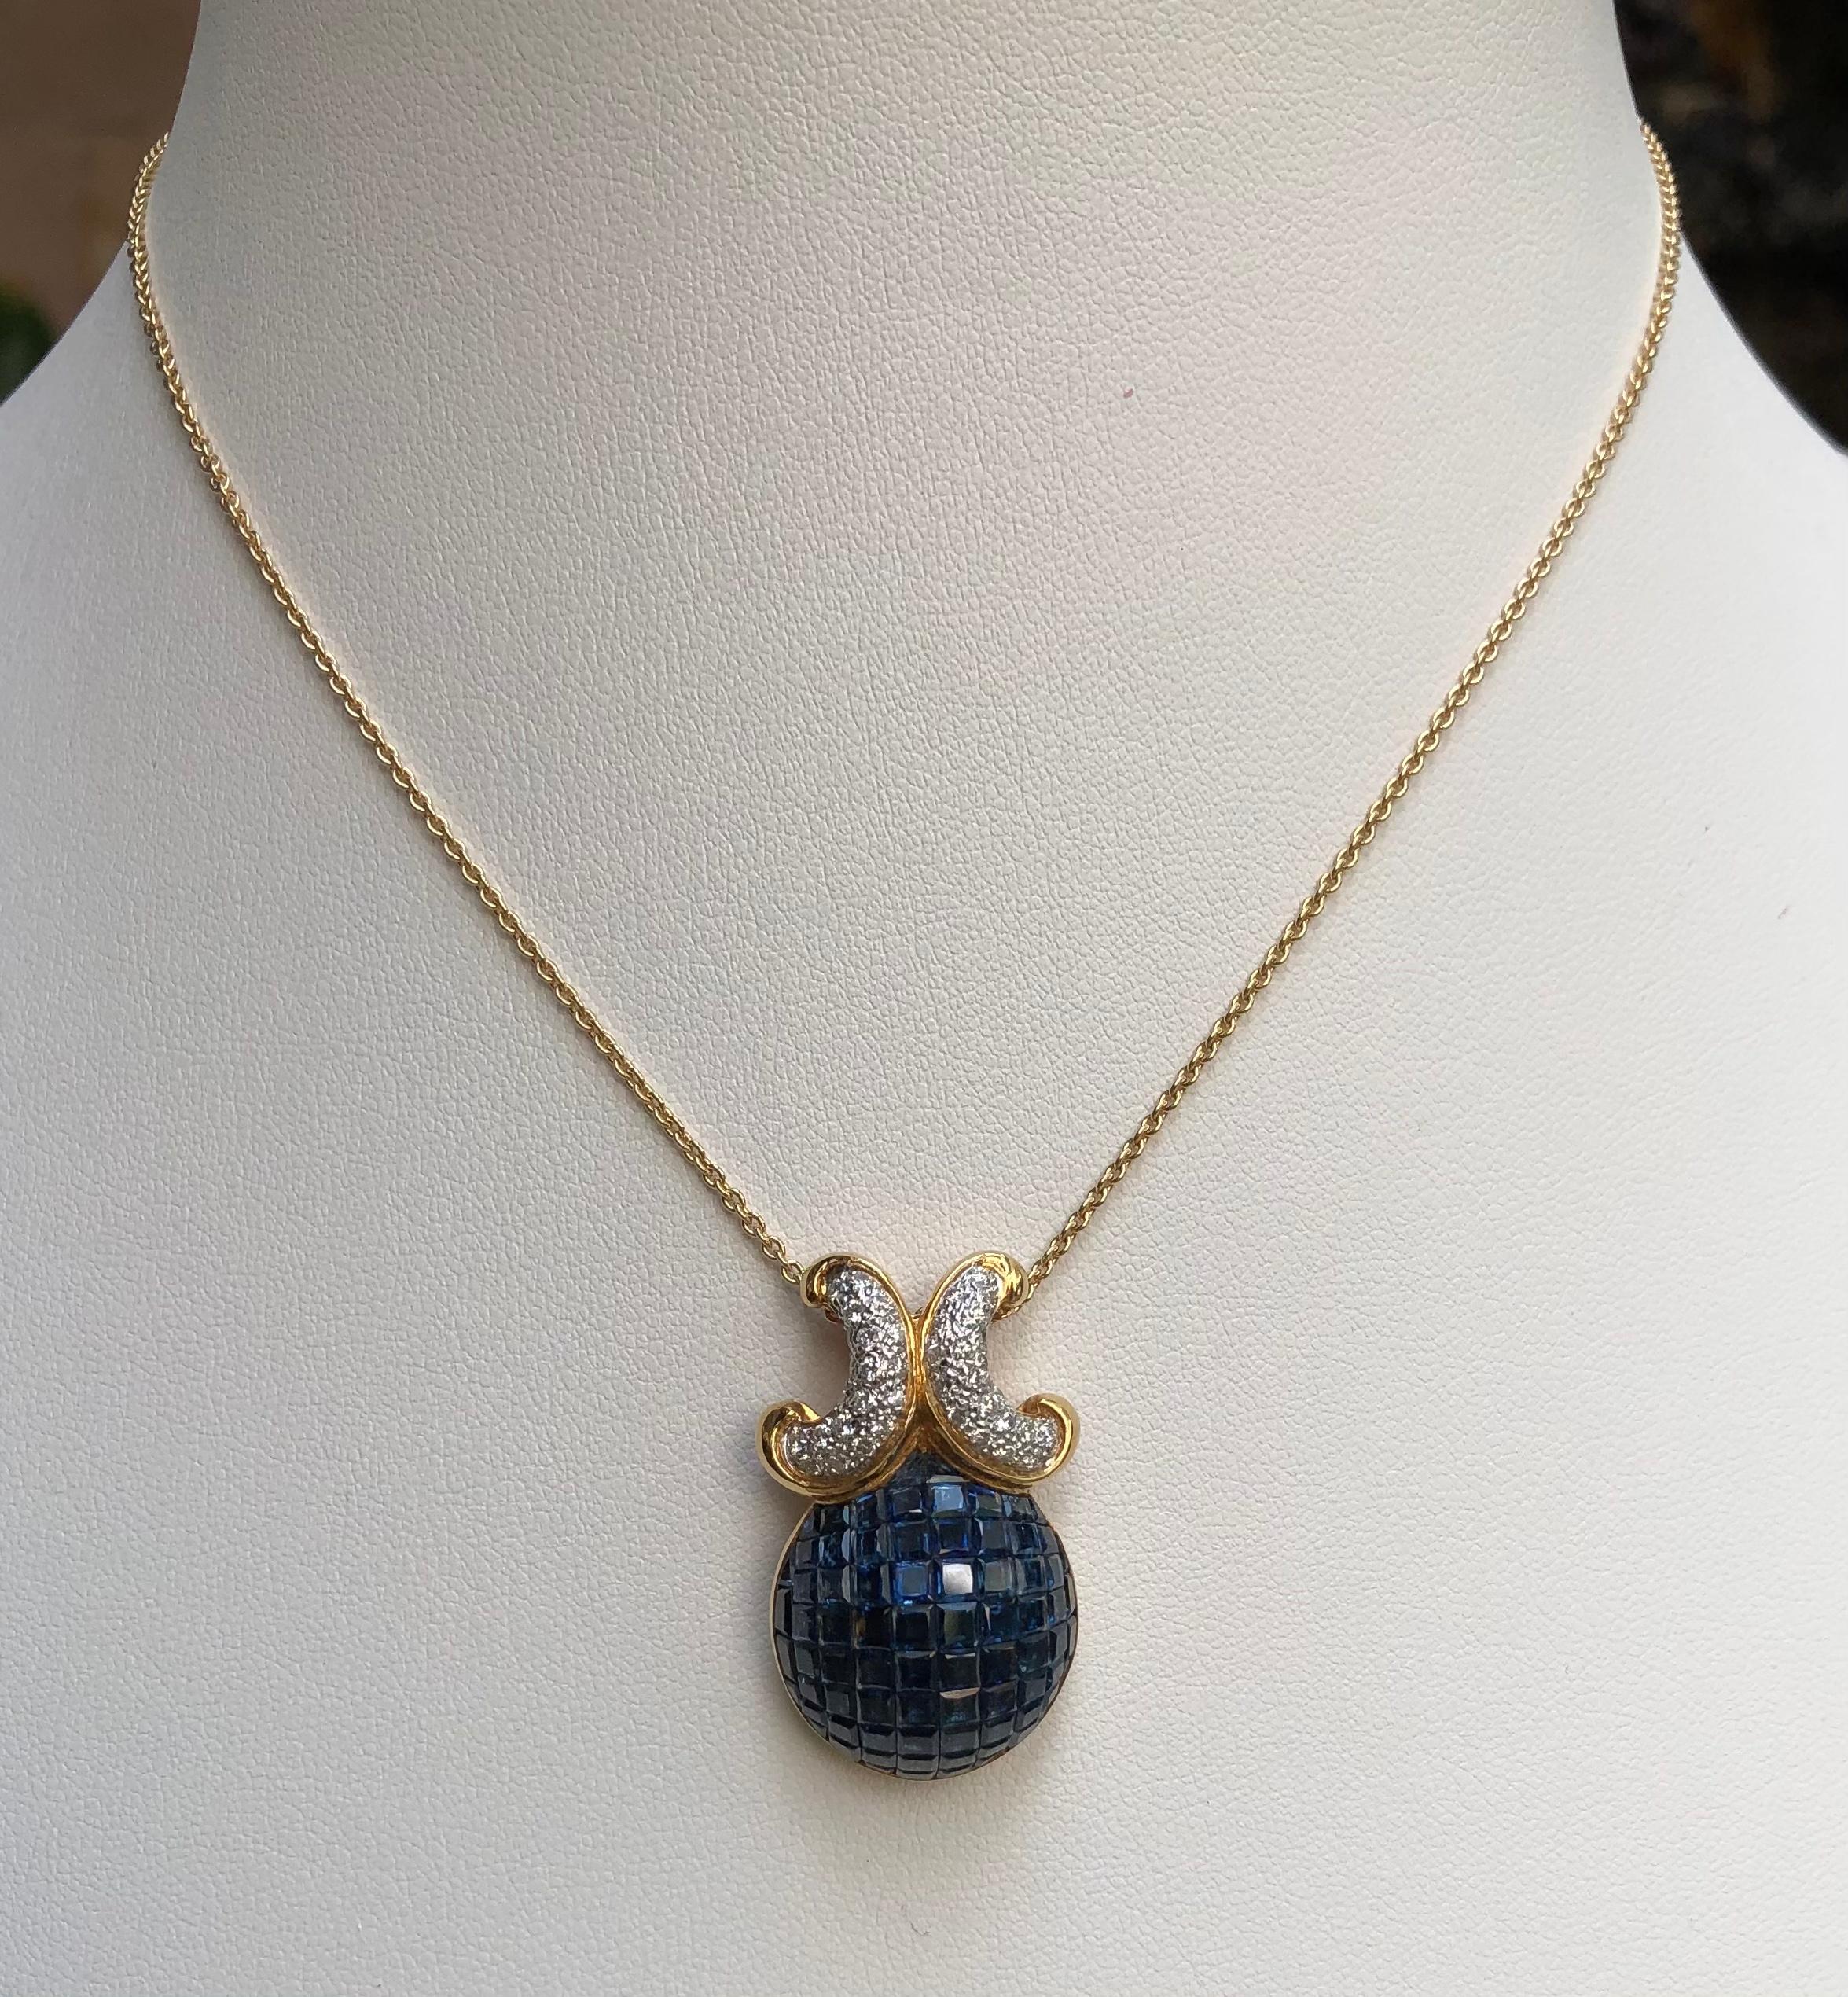 Blue Sapphire 16.98 carats with Diamond 0.53 carat Pendant set in 18 Karat Gold Settings
(chain not included)

Width:  1.9 cm 
Length: 3.5 cm
Total Weight: 15.23 grams

